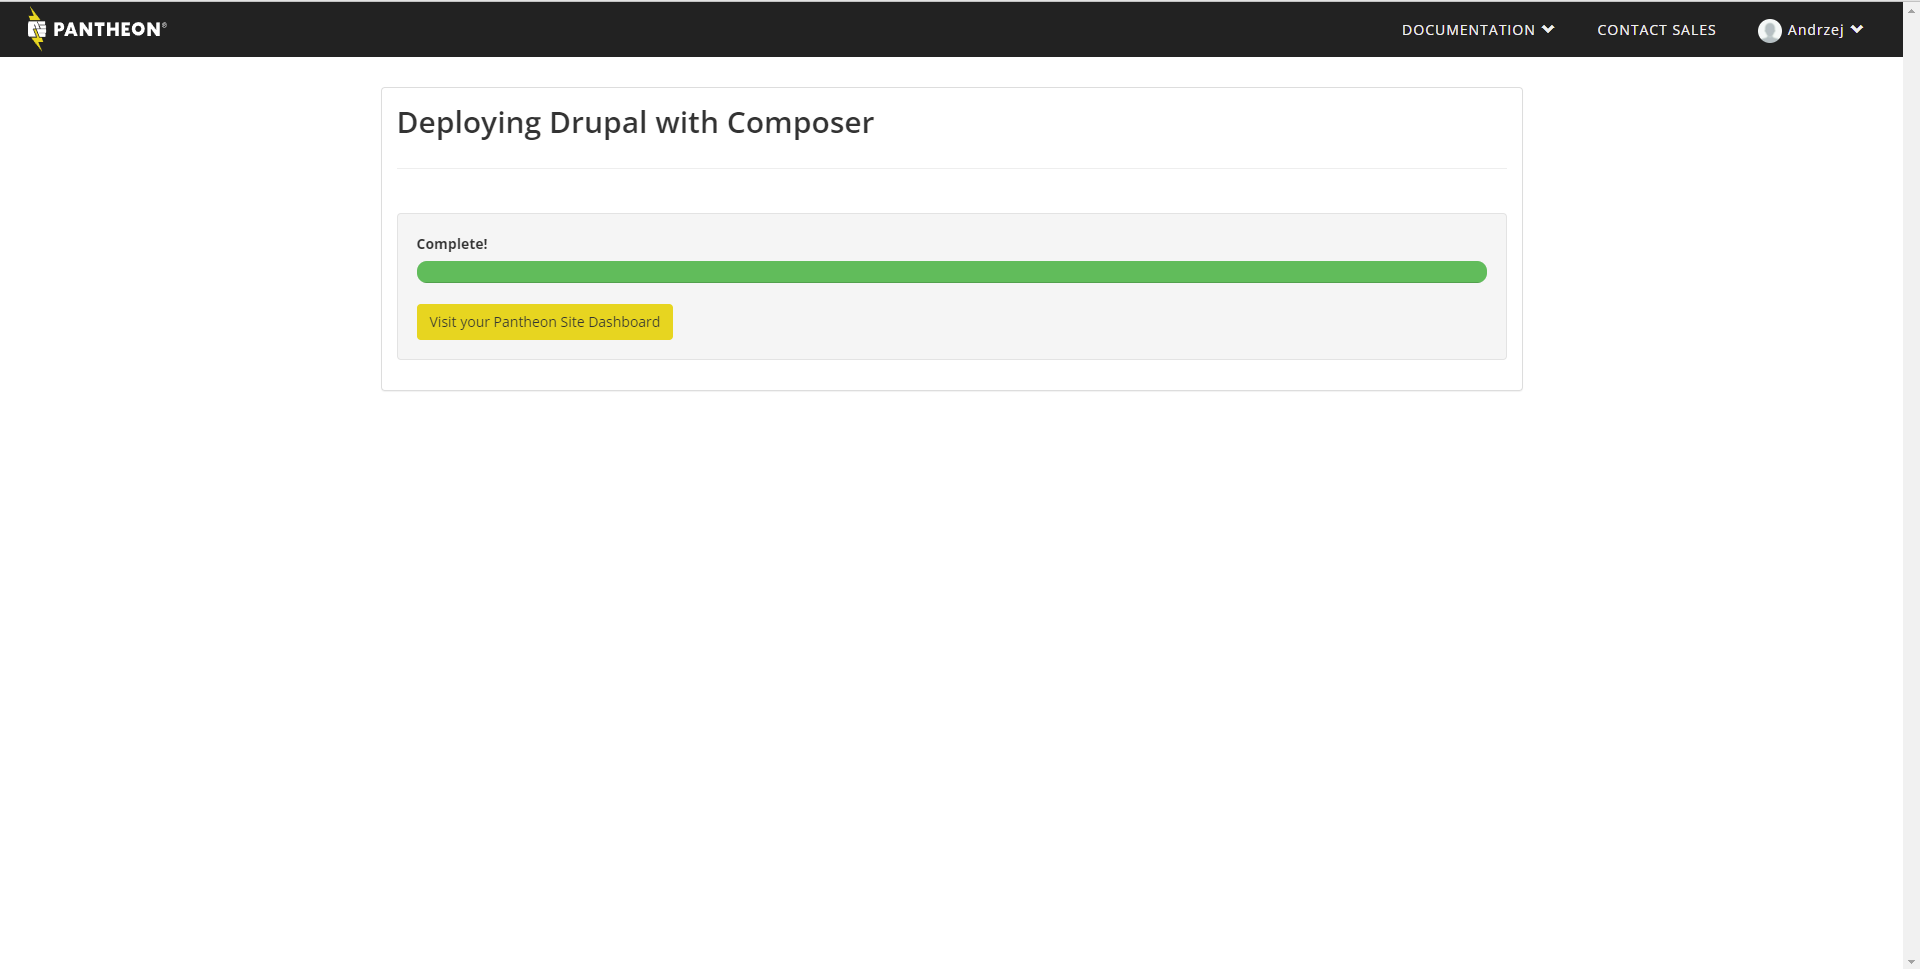 The process of implementing Drupal with Composer